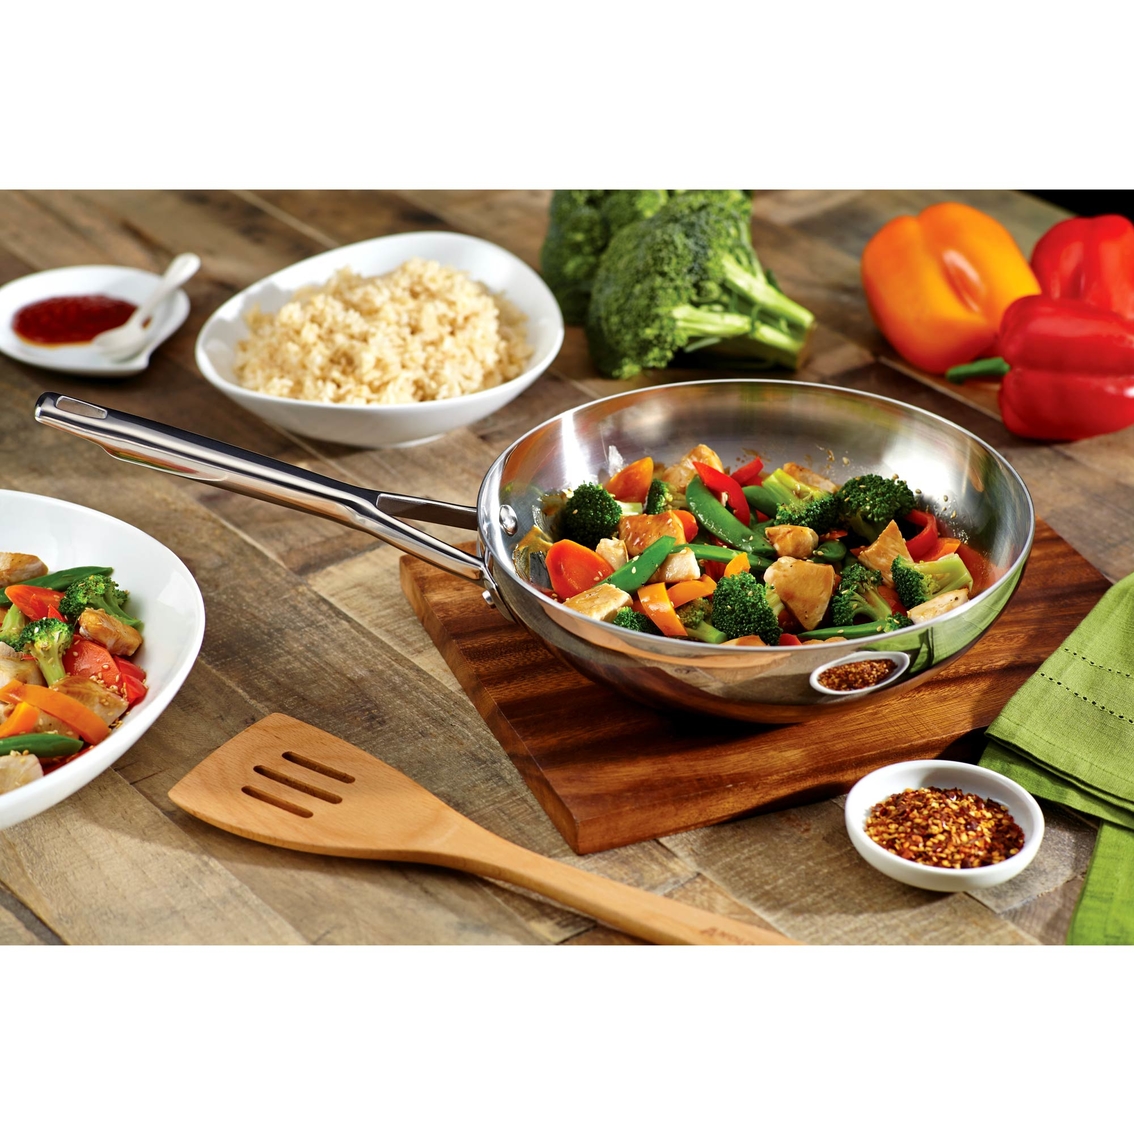 Anolon Tri Ply Clad Stainless Steel 10.75 In. Stir Fry | Fry Pans Anolon Tri Ply Stainless Steel 10.75 Stir Fry